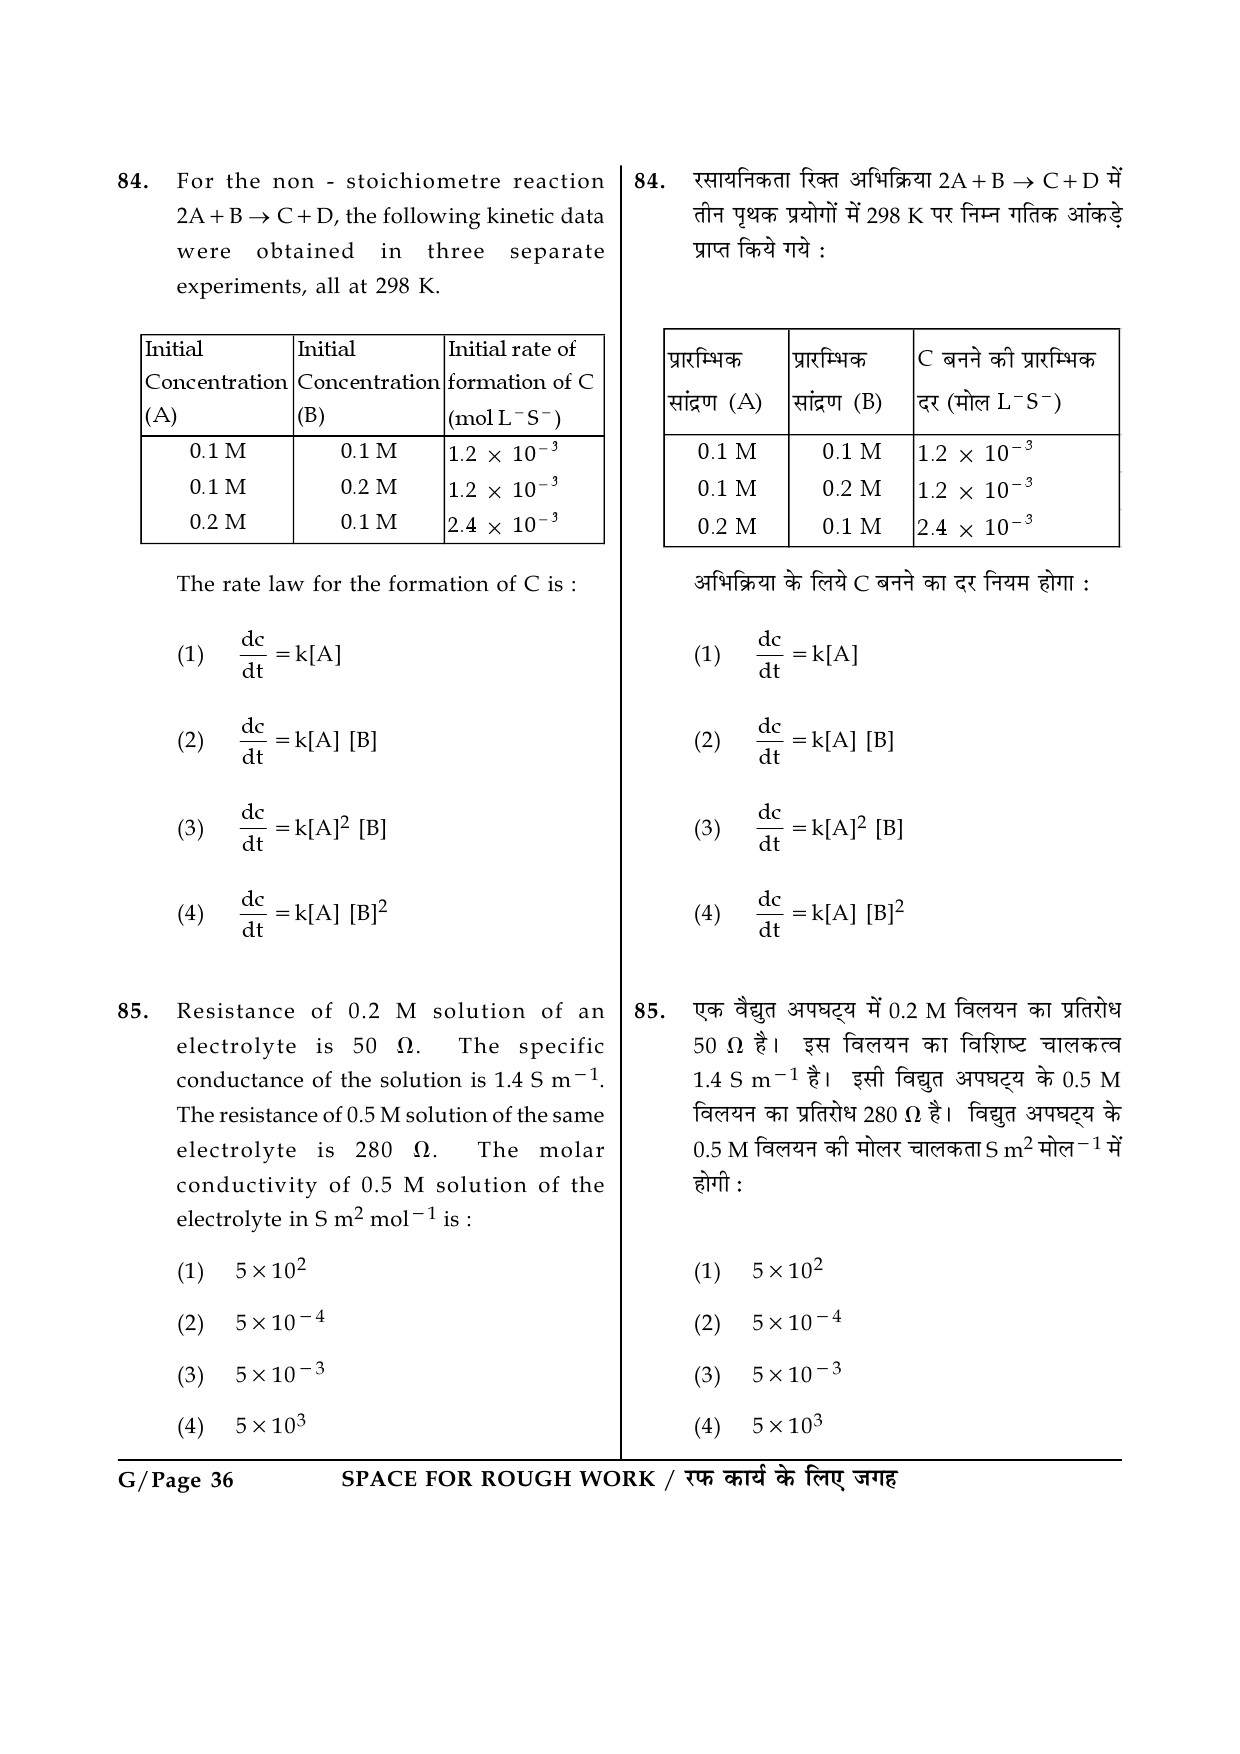 JEE Main Exam Question Paper 2014 Booklet G 36